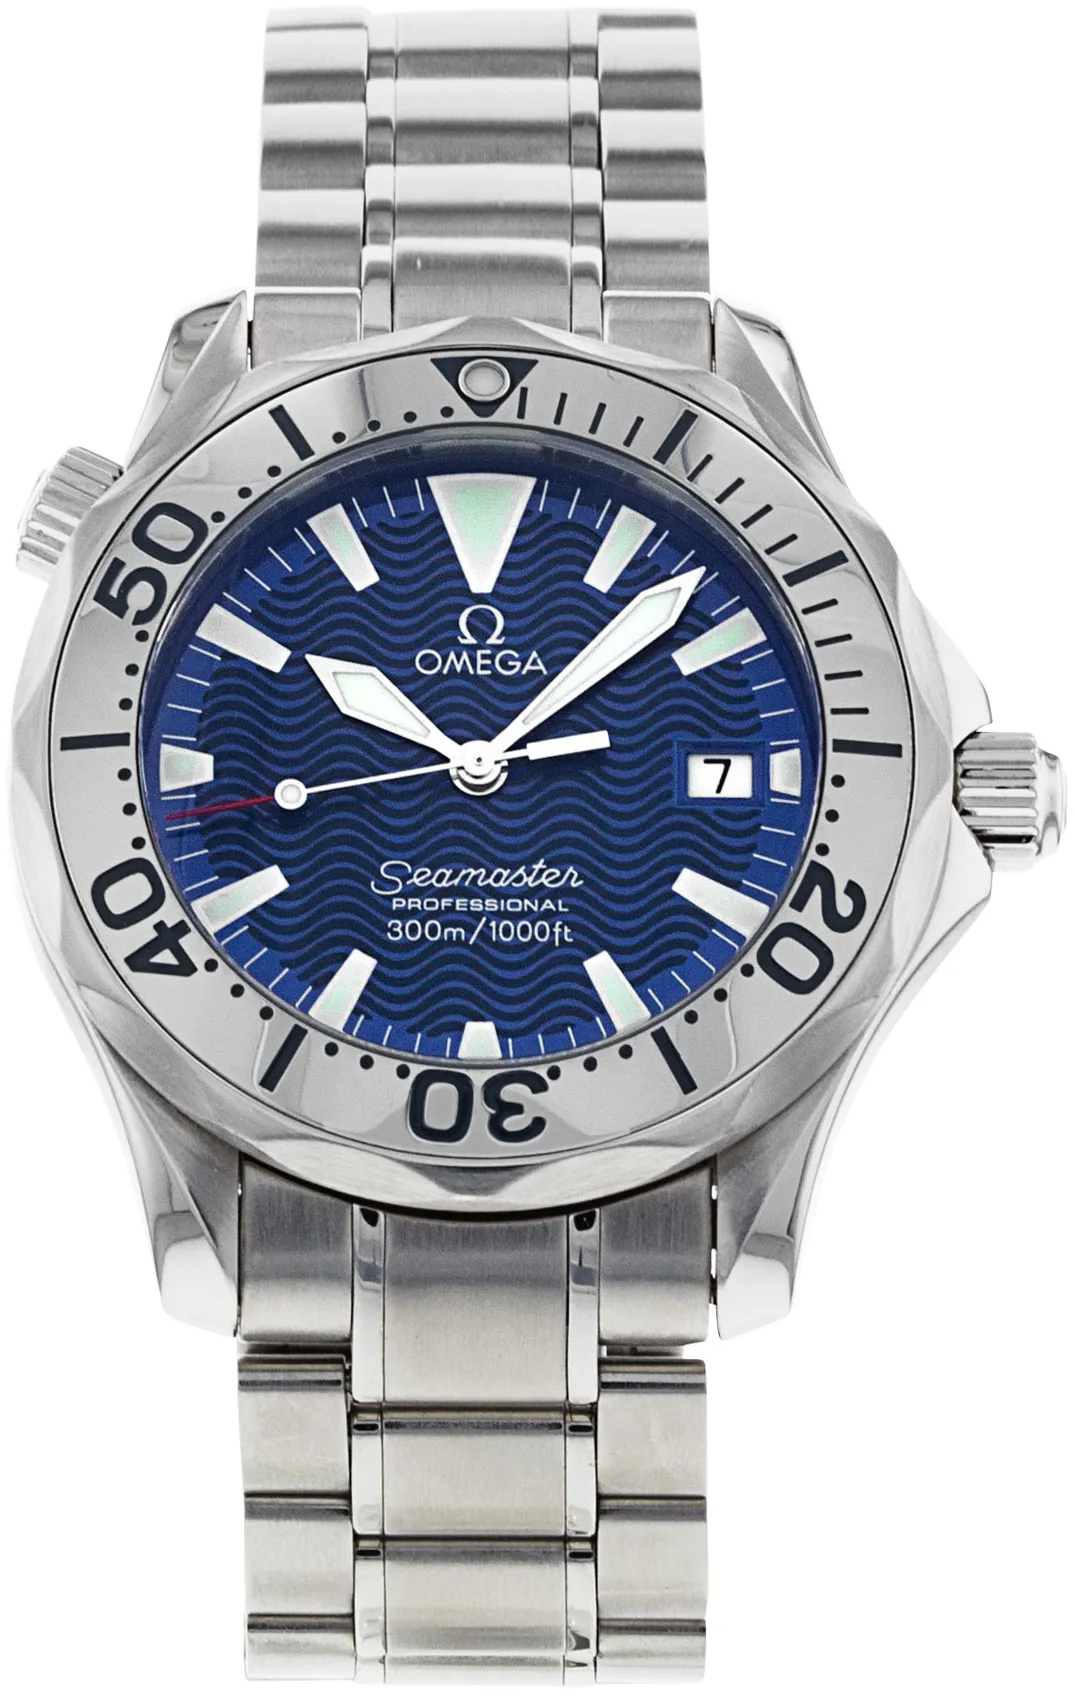 Omega Seamaster Diver 300M 2263.80.00 36mm Stainless steel